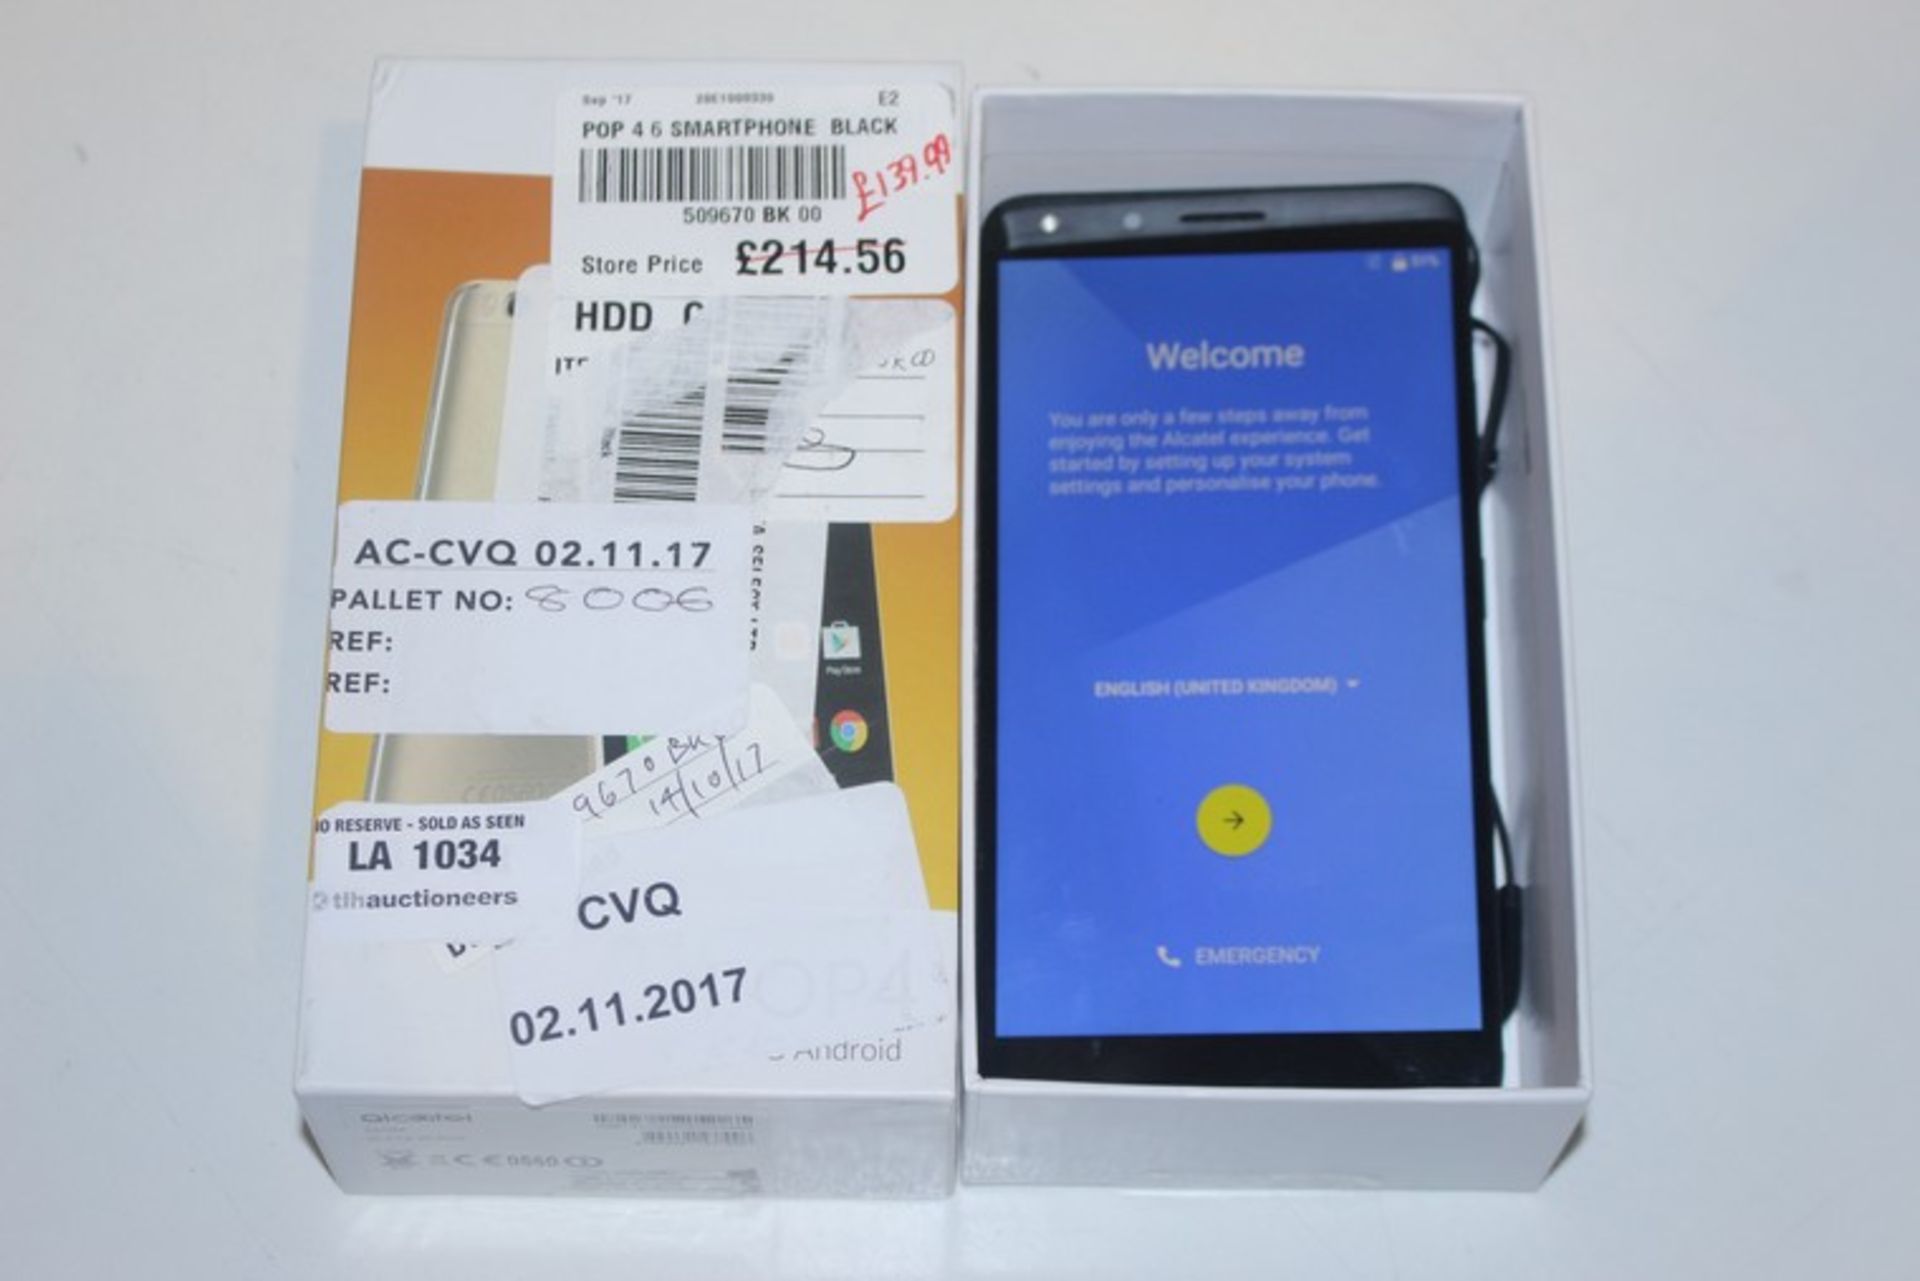 1 x BOXED ALCATEL POP FOUR SIX SMARTPHONE IN BLACK RRP £140 (02/11/17) (8006) *PLEASE NOTE THAT